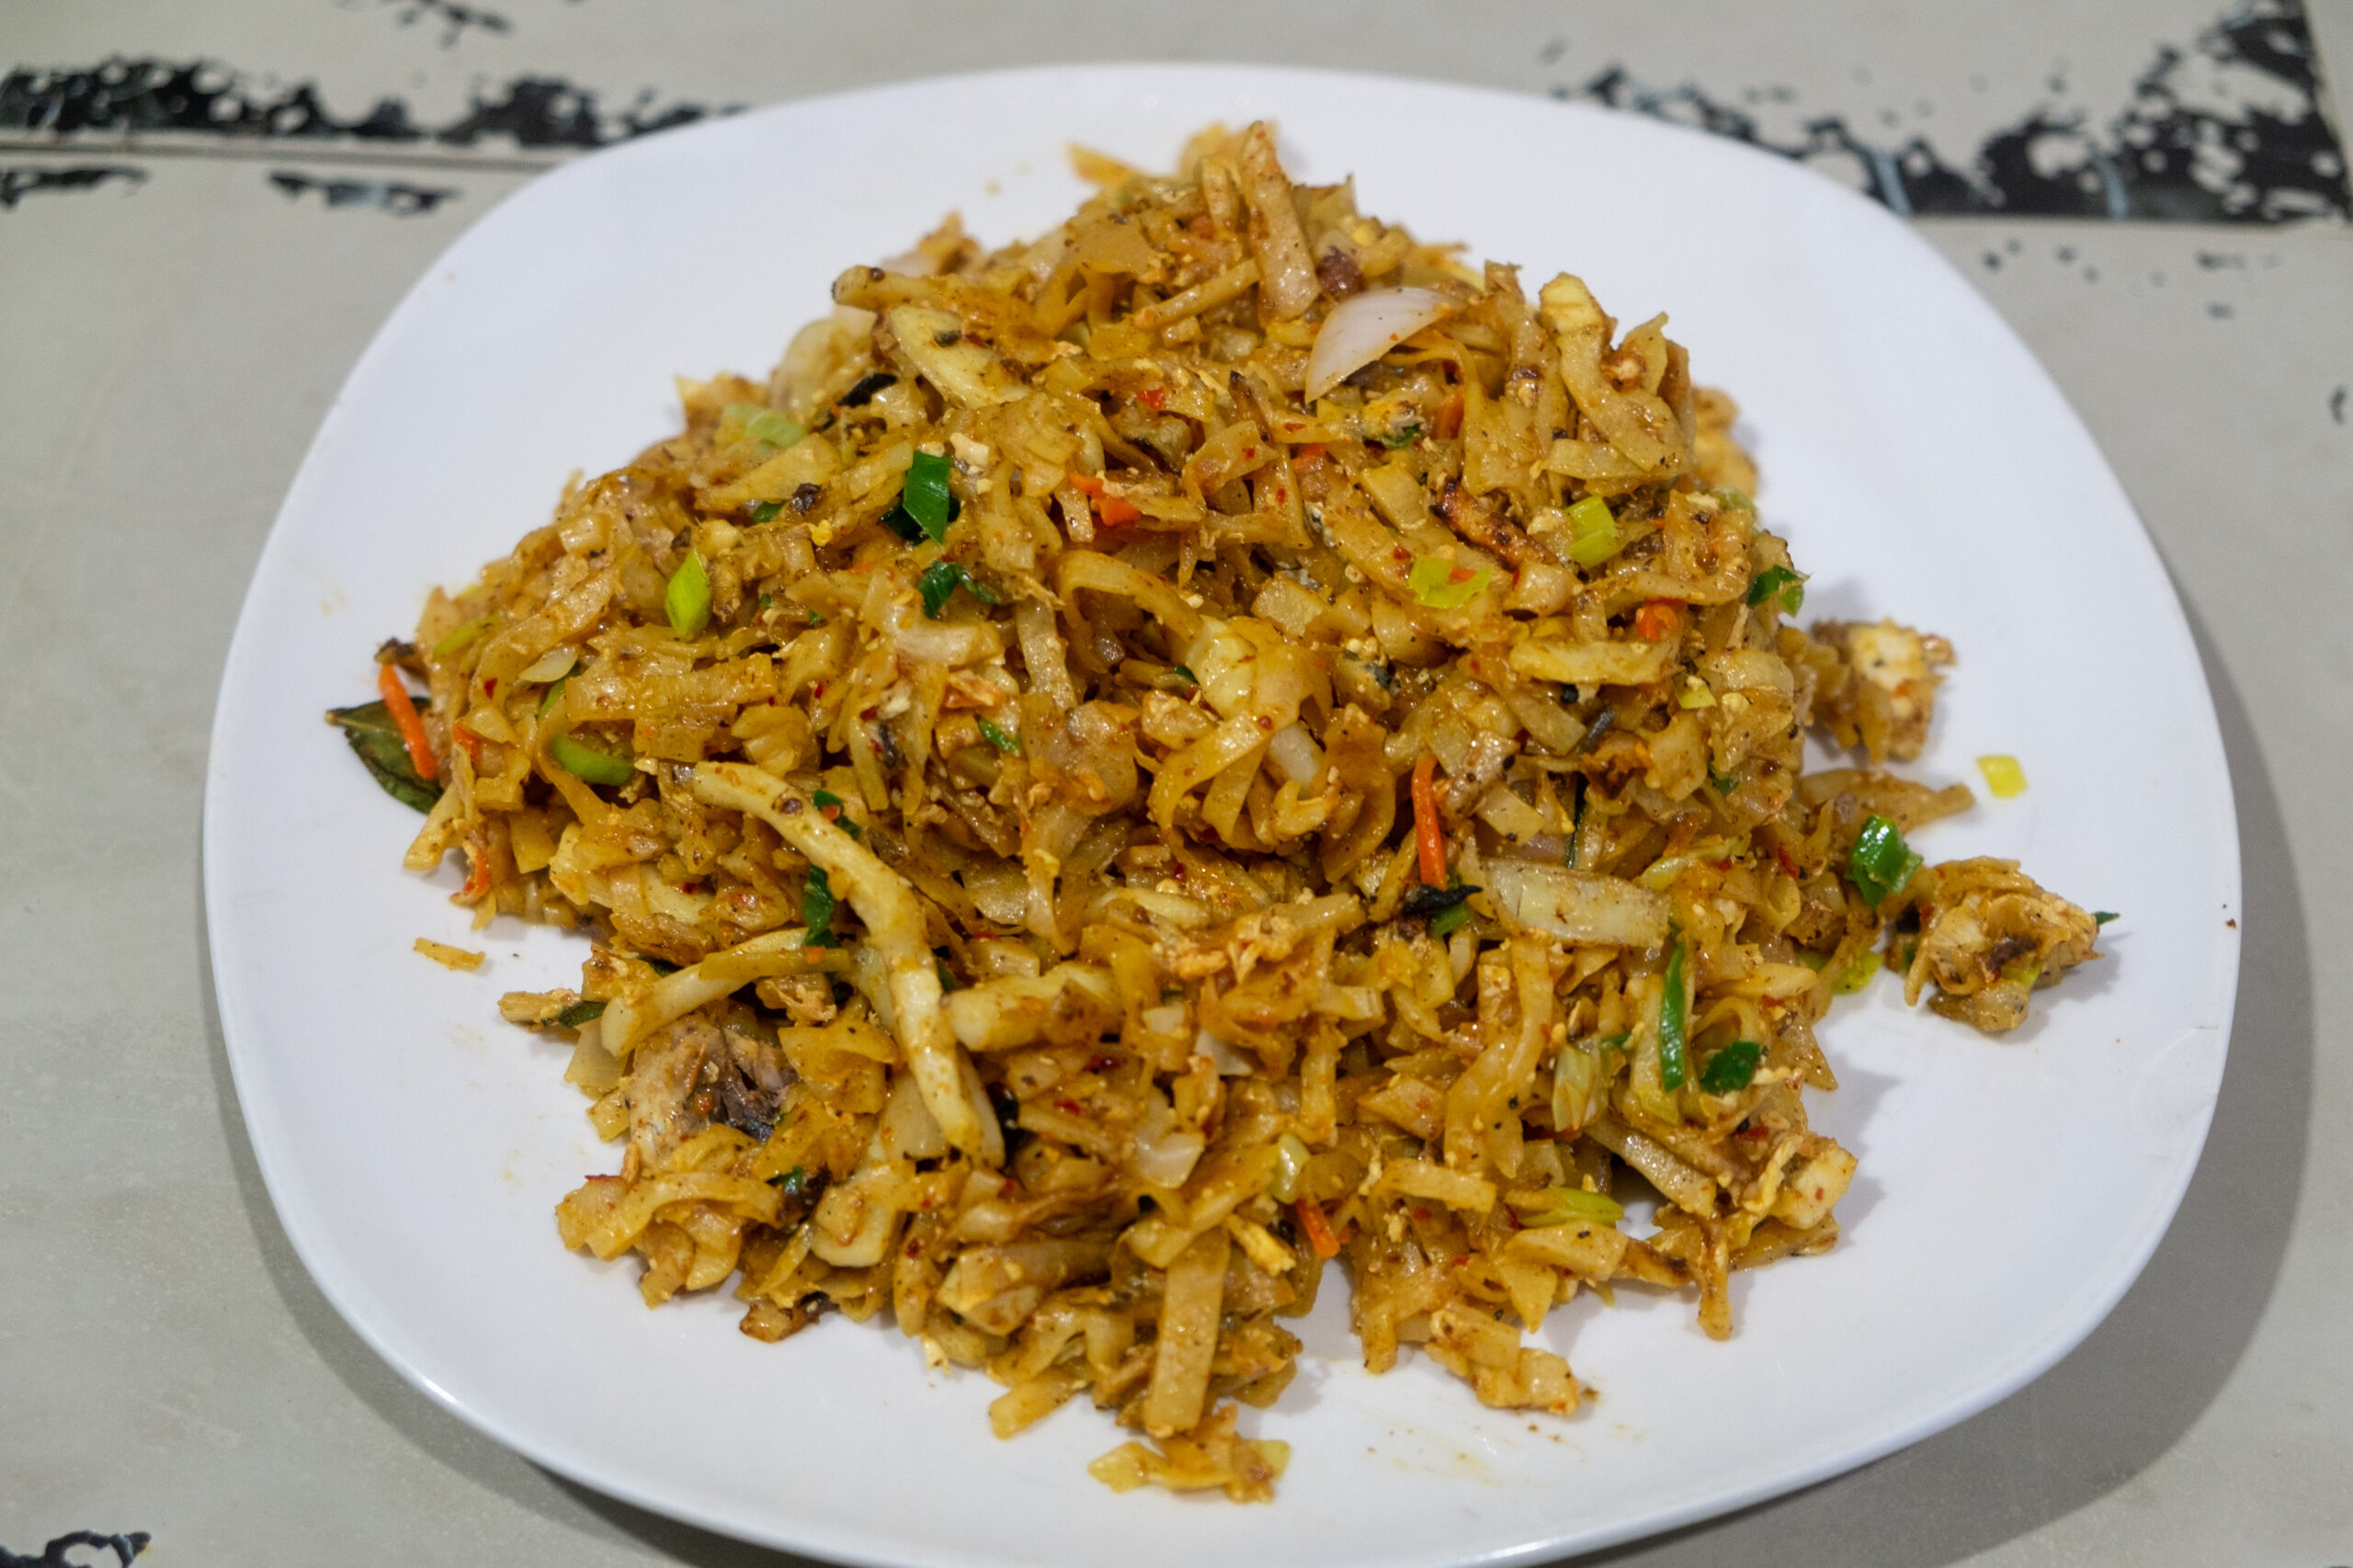 Fried rice and Kottu Price reduced by 10%